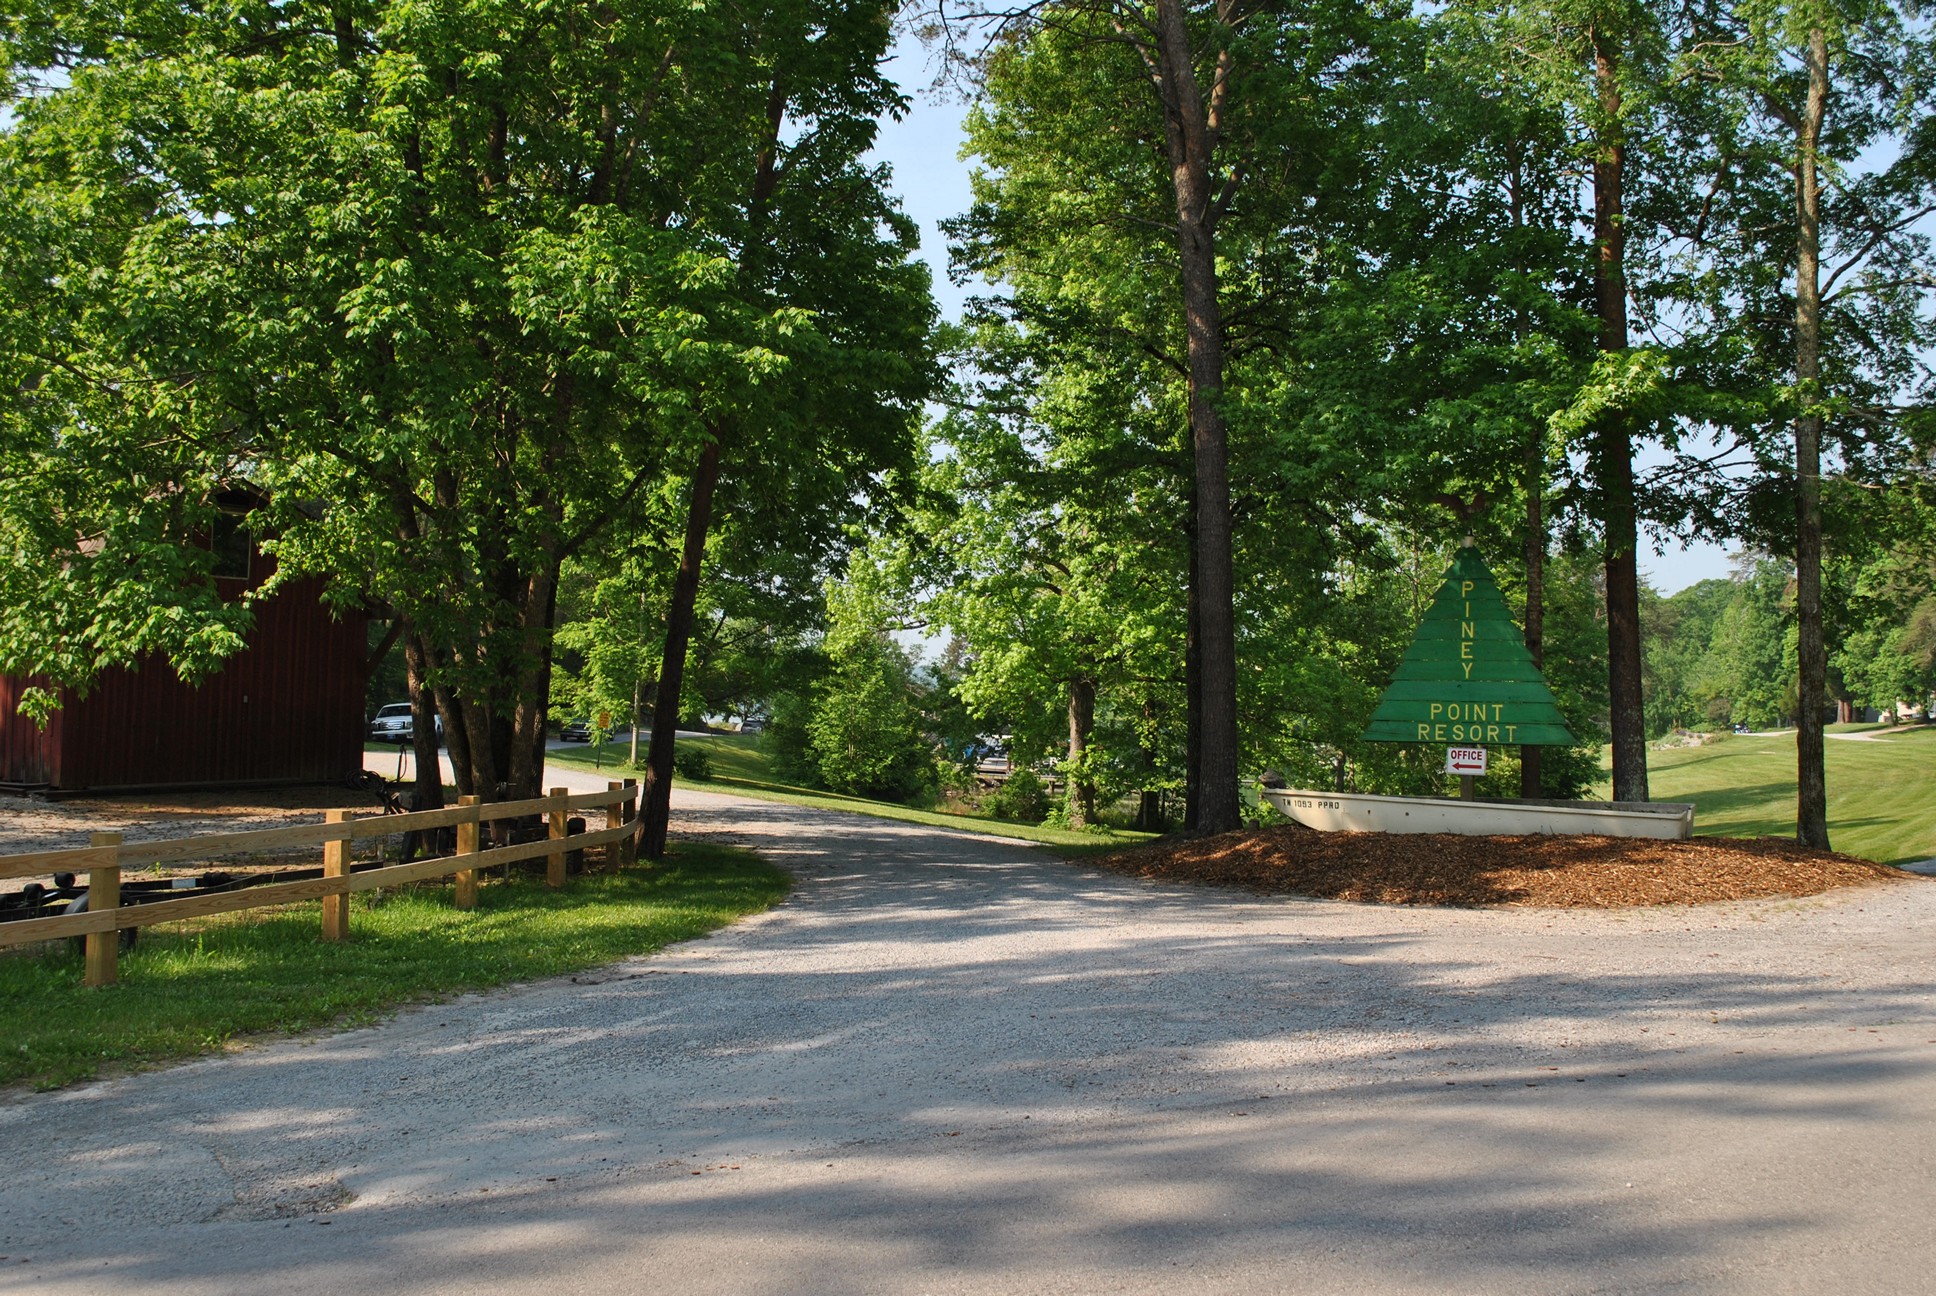 Picture of Piney Point Resort entrance